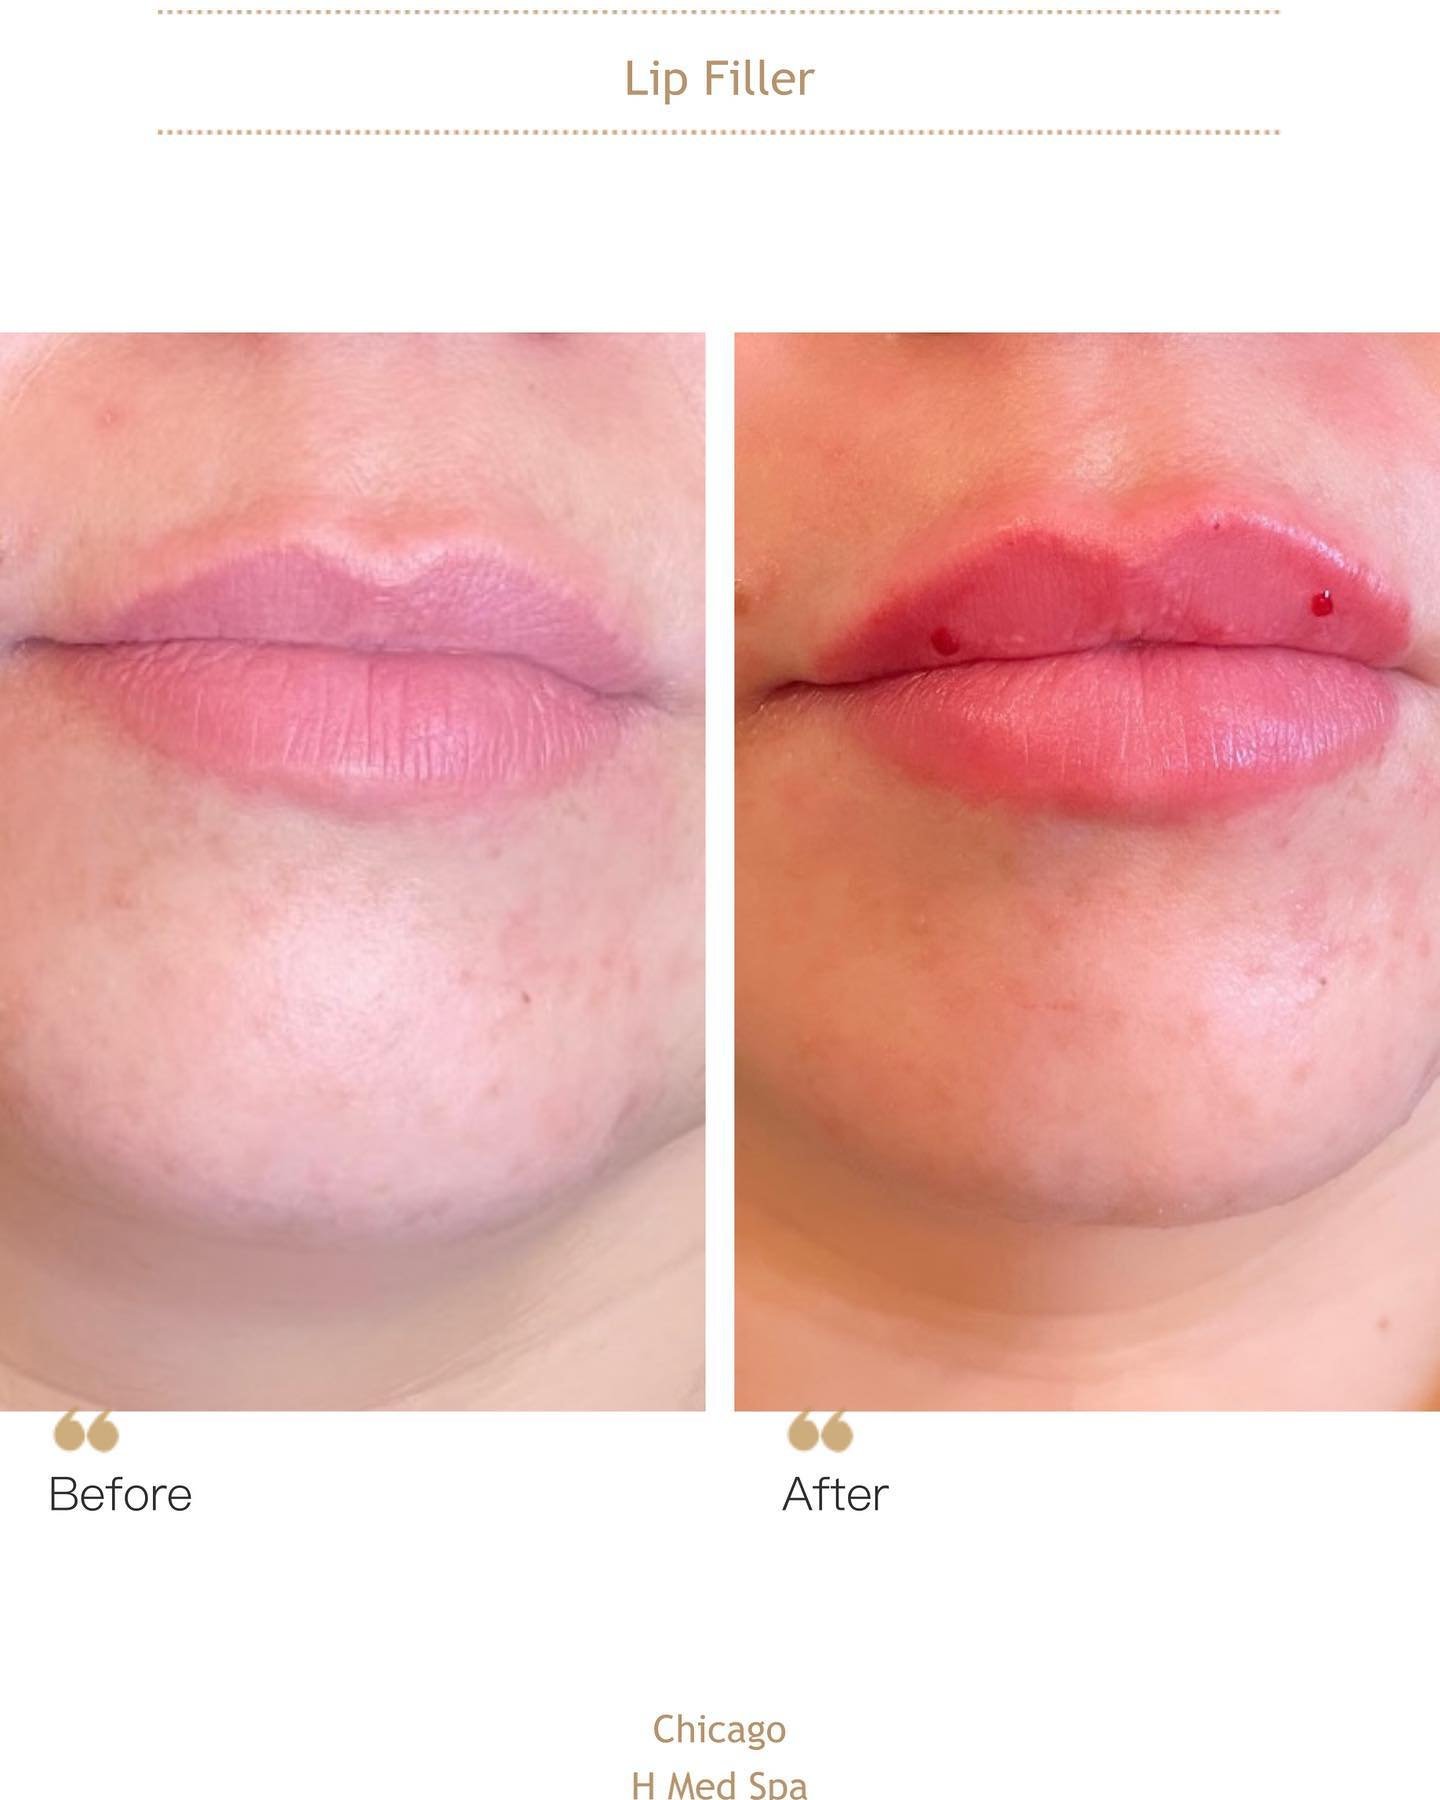 Beautiful Lip Enhancement 👄 
This hyaluronic acid lip filler will help to add volume if you have thin lip, we can also help you to design any shapes you like according each own individual. Usually it takes about one-two weeks to settle with more nat